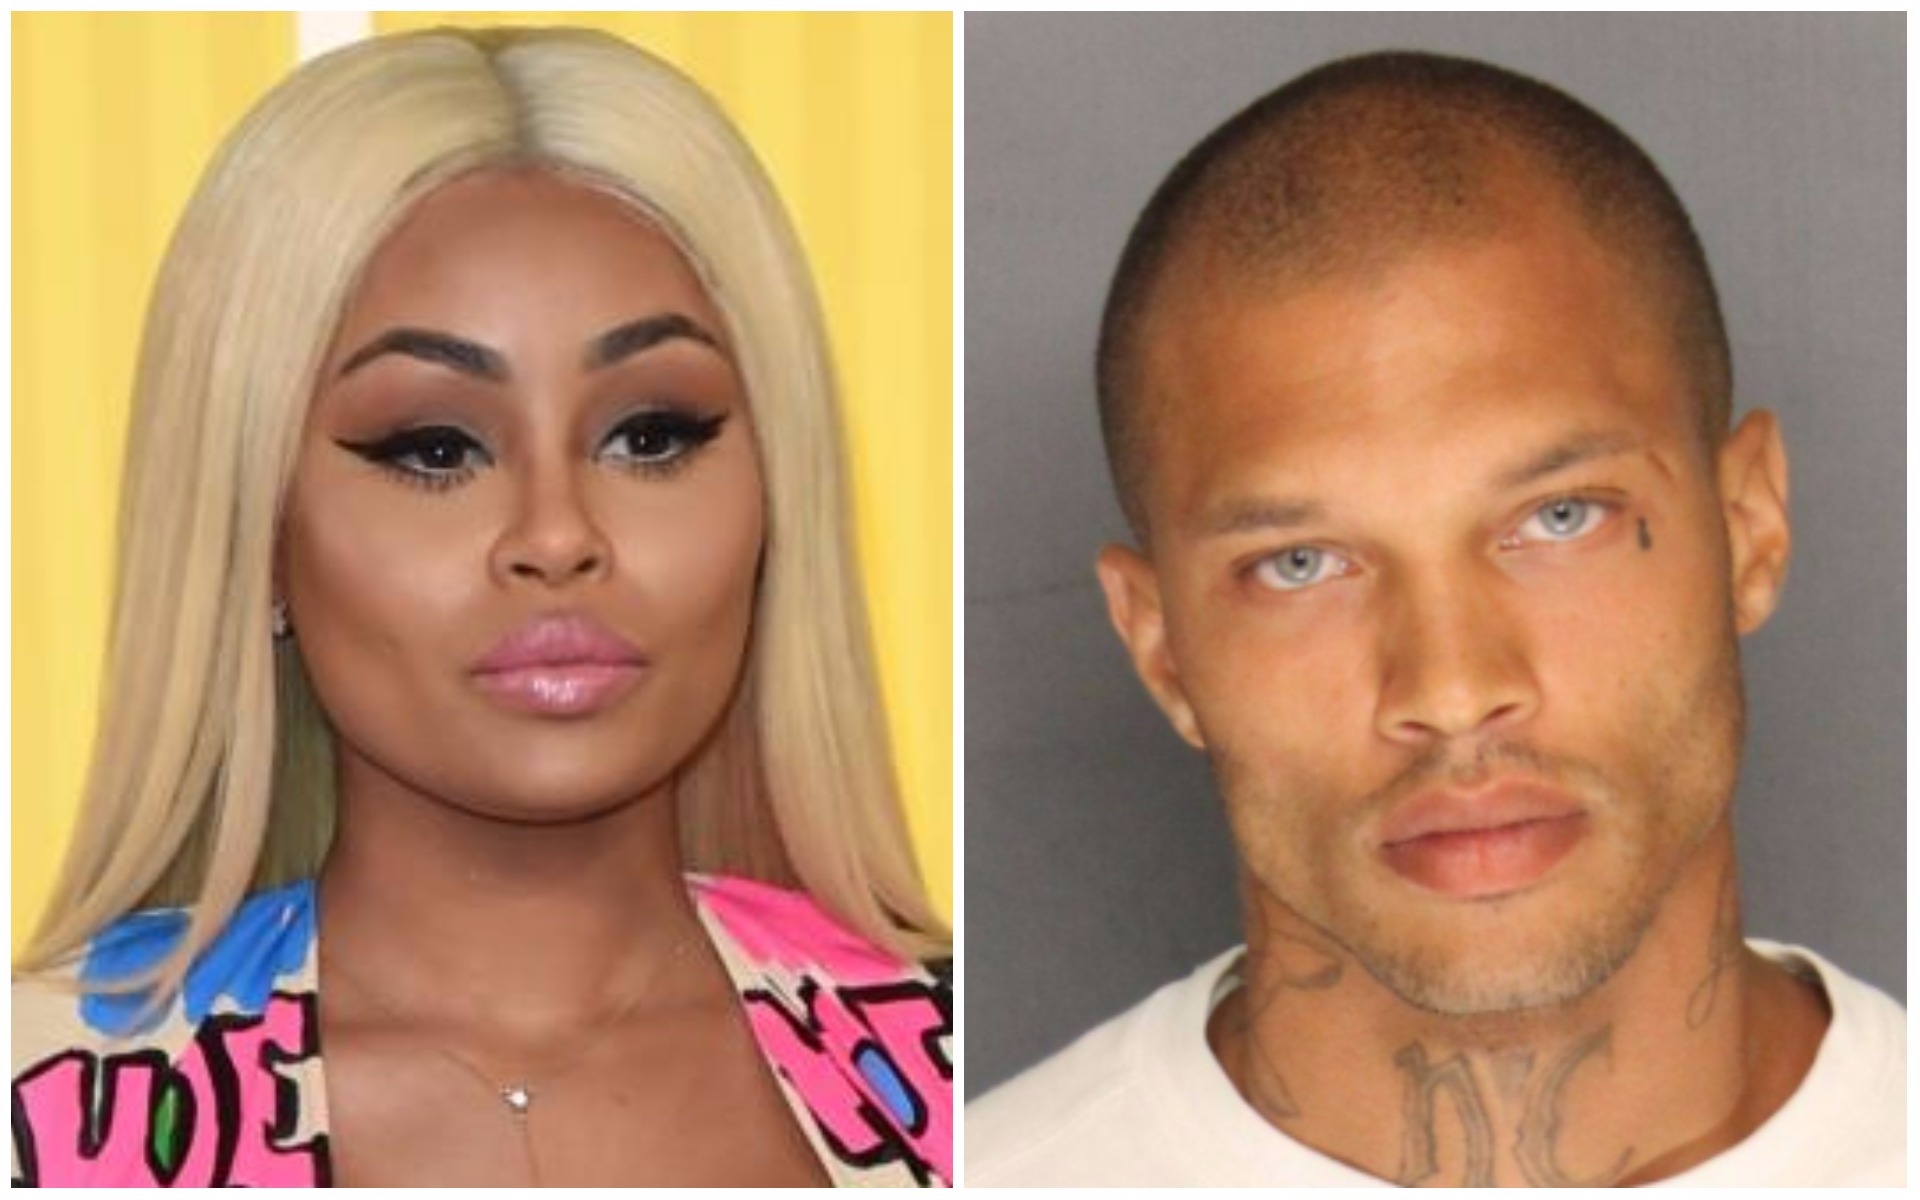 darlene norman recommends jeremy meeks naked pic